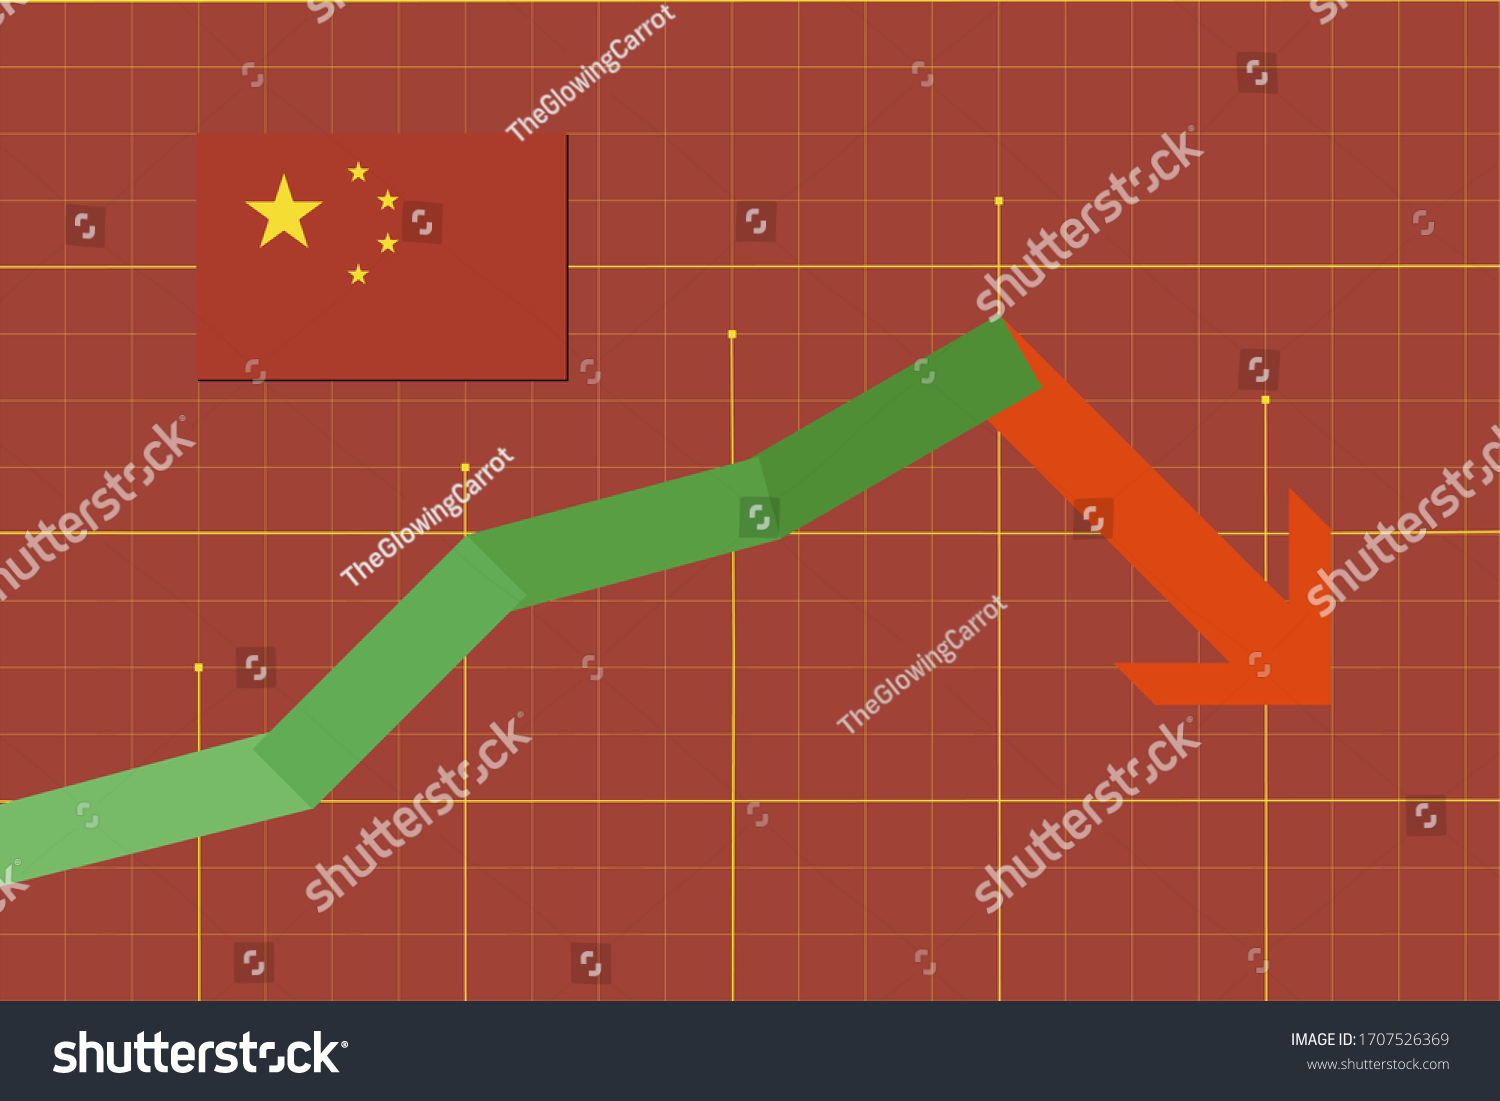 SVG of Info graph showing the flag of China and green and red arrow going down representing economic growth and then decline.  svg